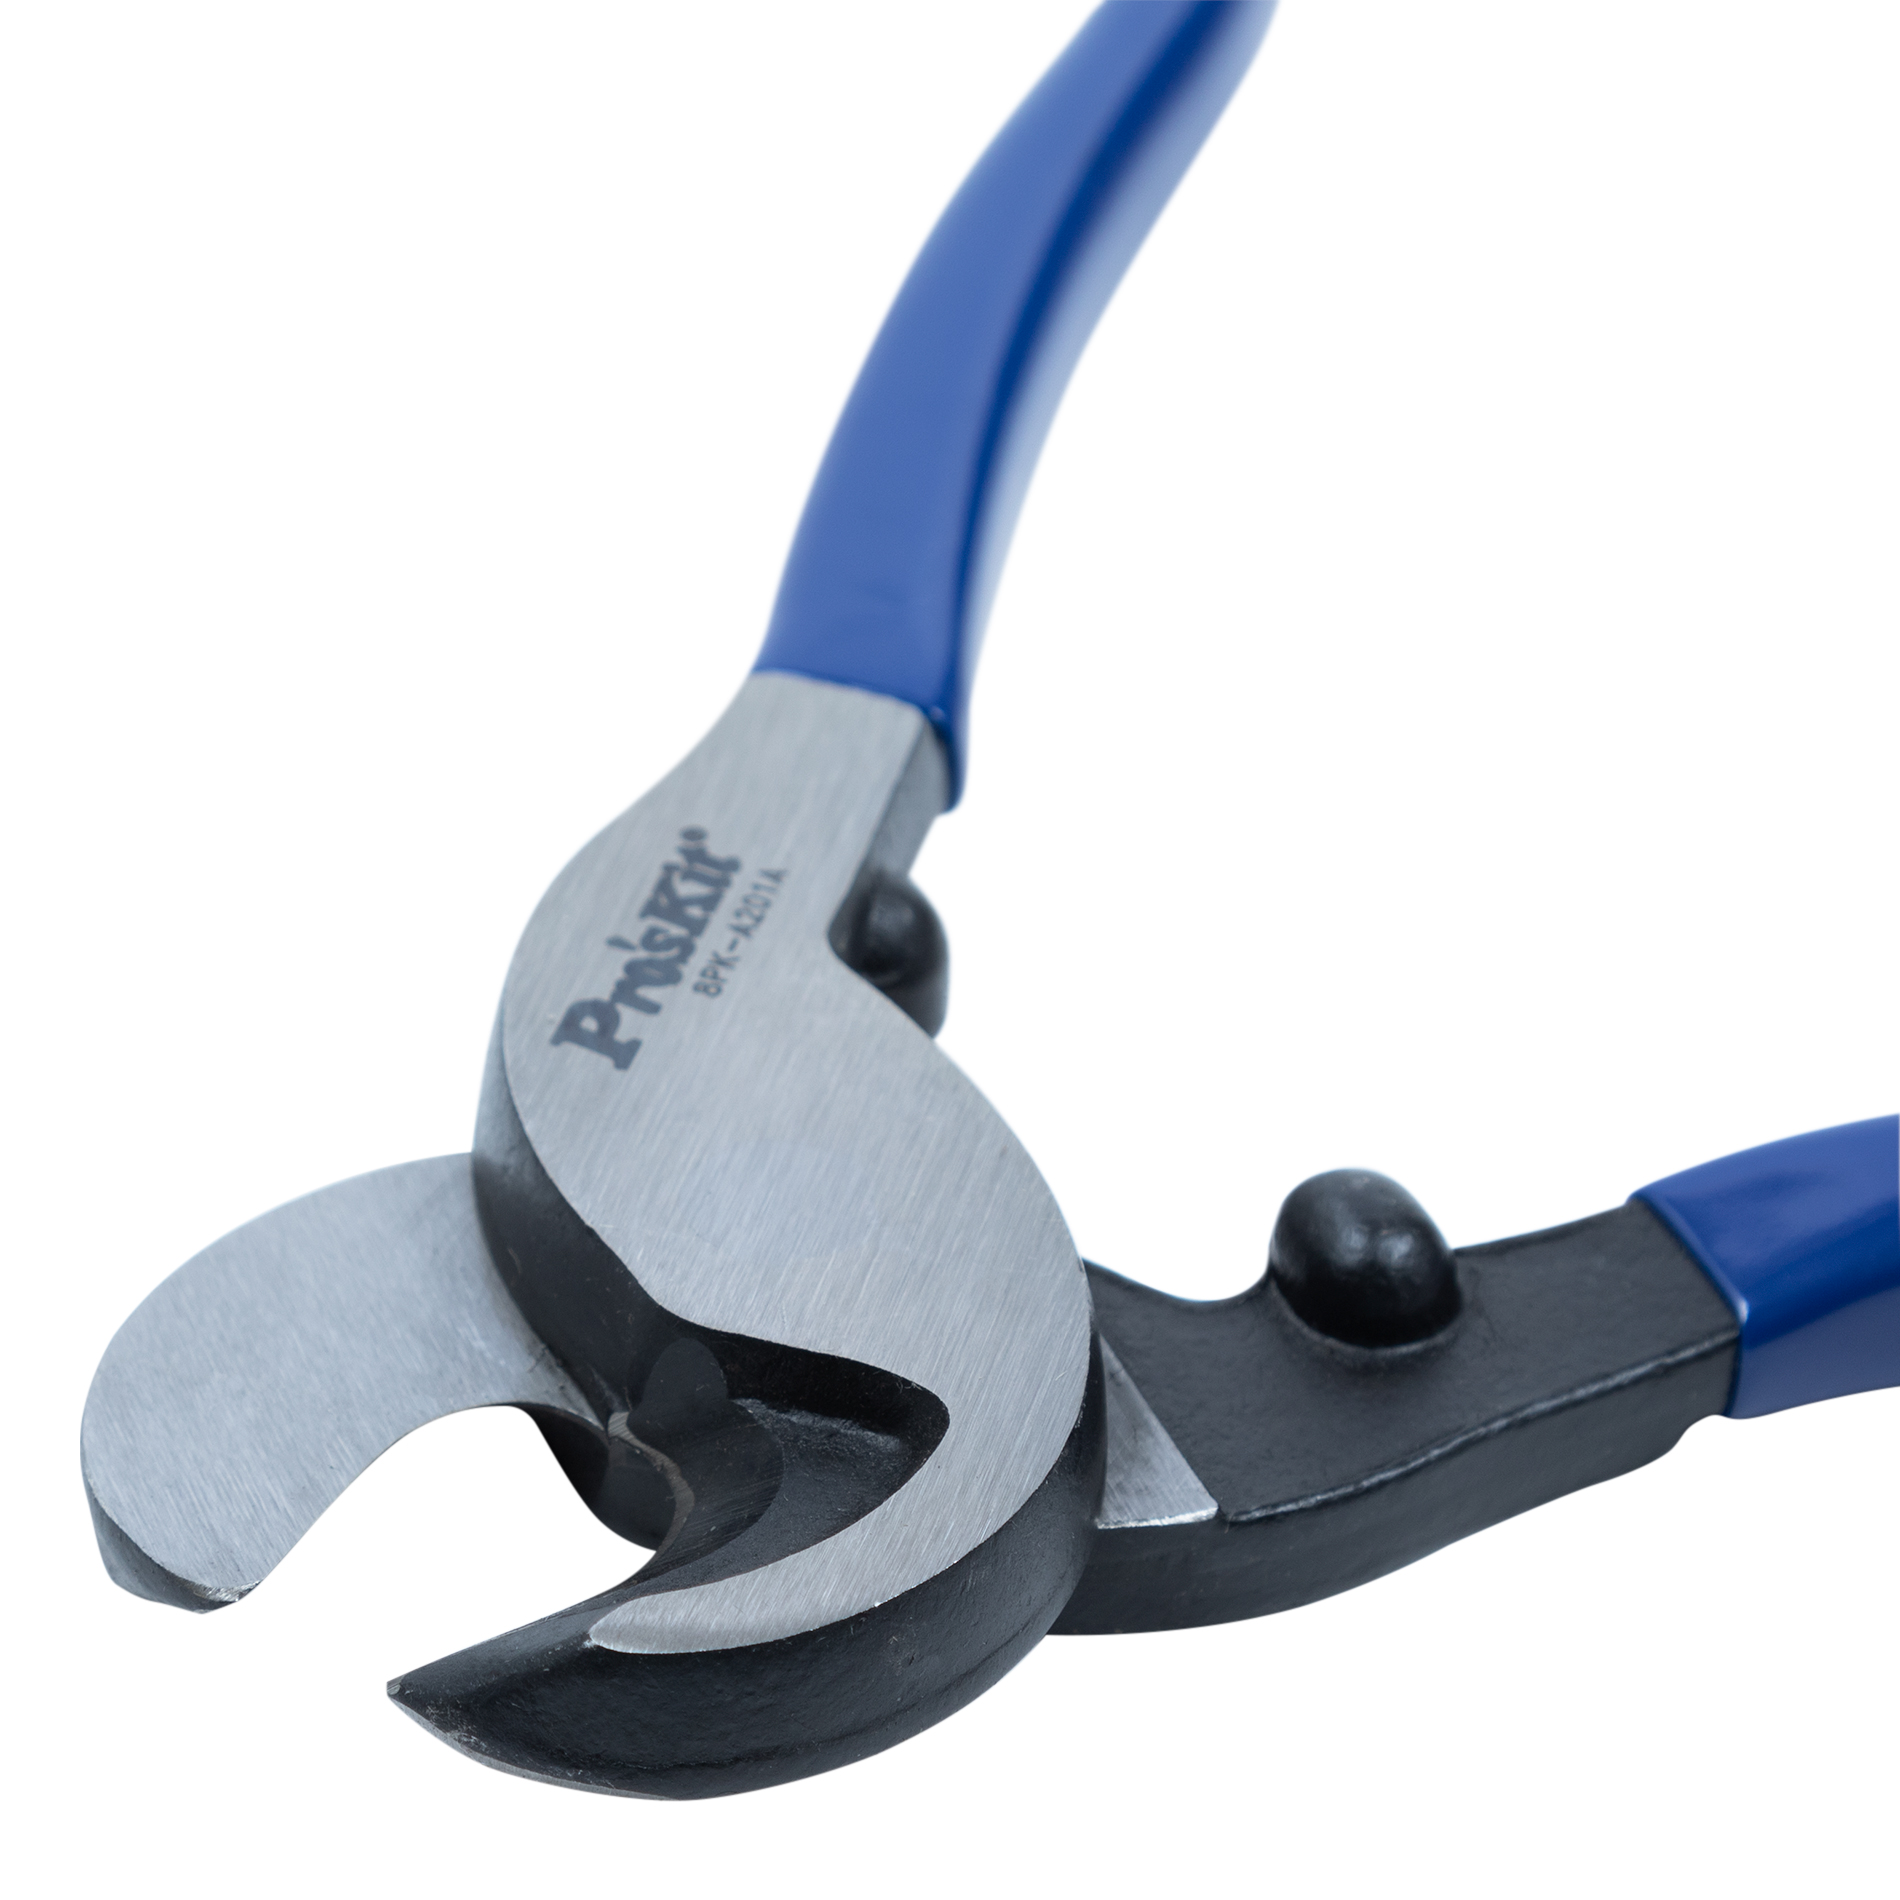 eclipse 200-069 Forged Cable Cutter, 9.3 in OAL, Mild Steel Jaw - 3